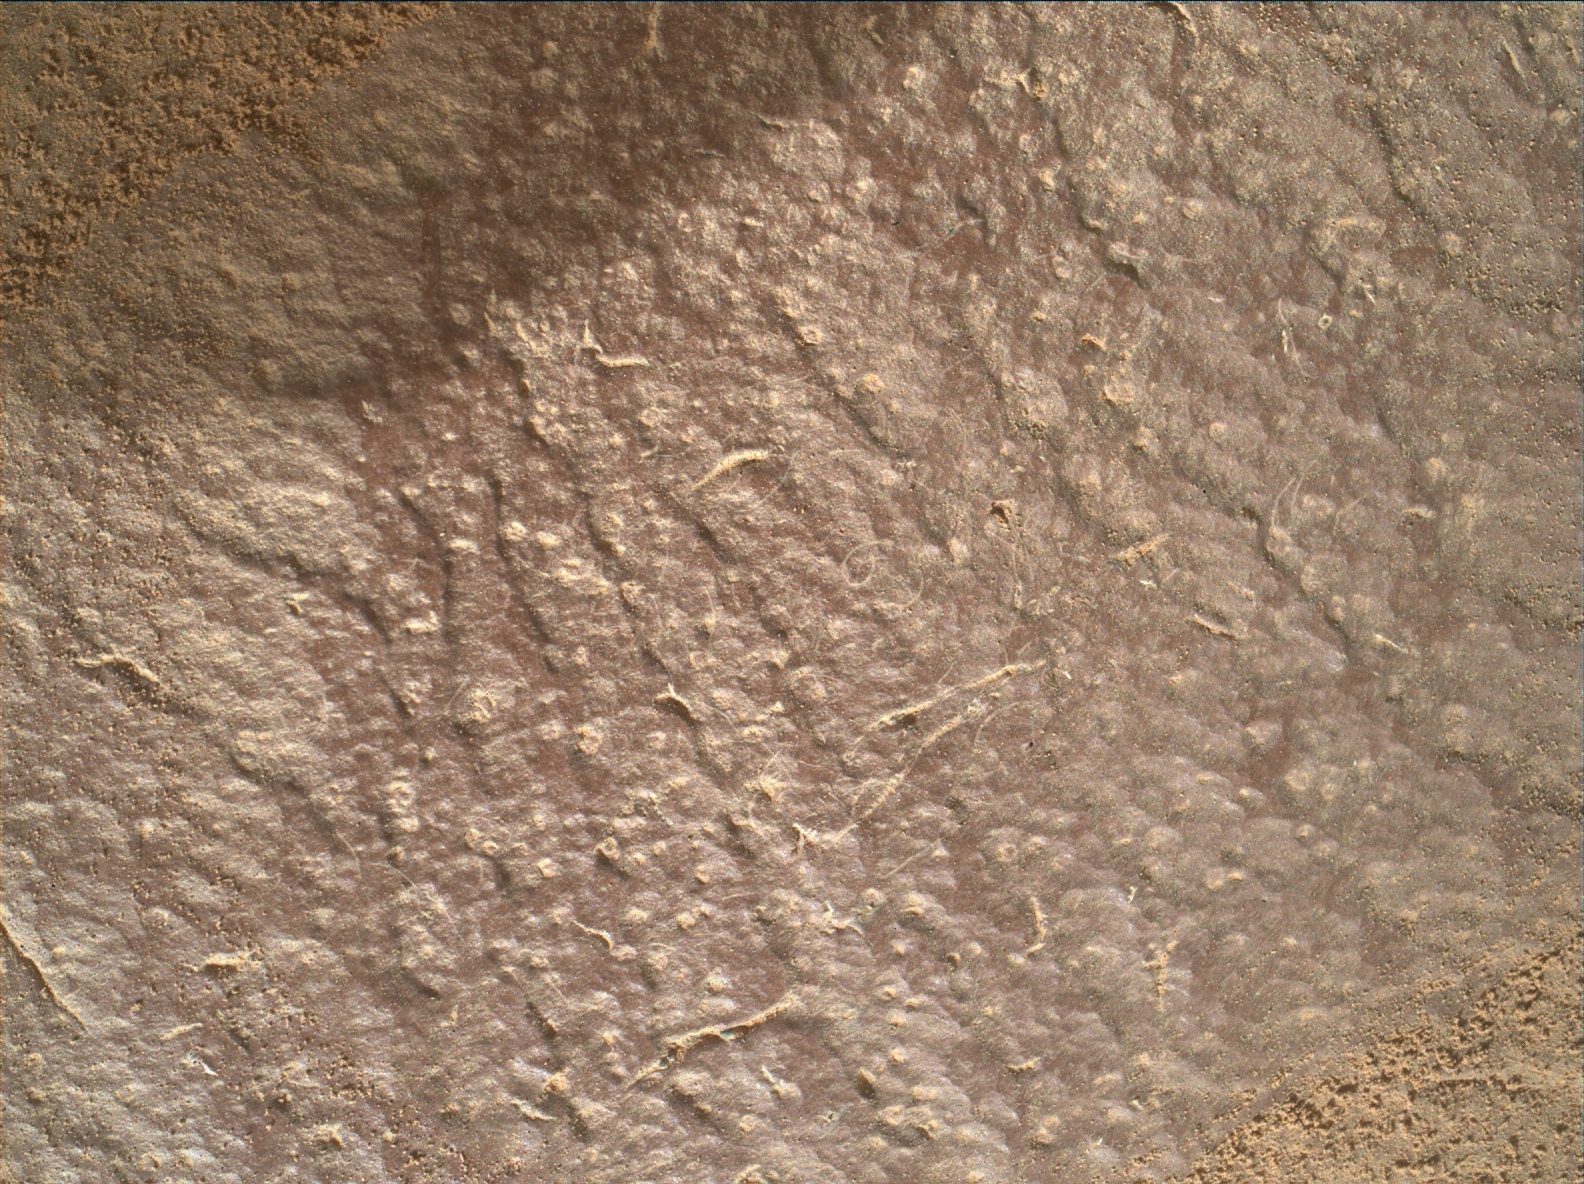 Nasa's Mars rover Curiosity acquired this image using its Mars Hand Lens Imager (MAHLI) on Sol 1417